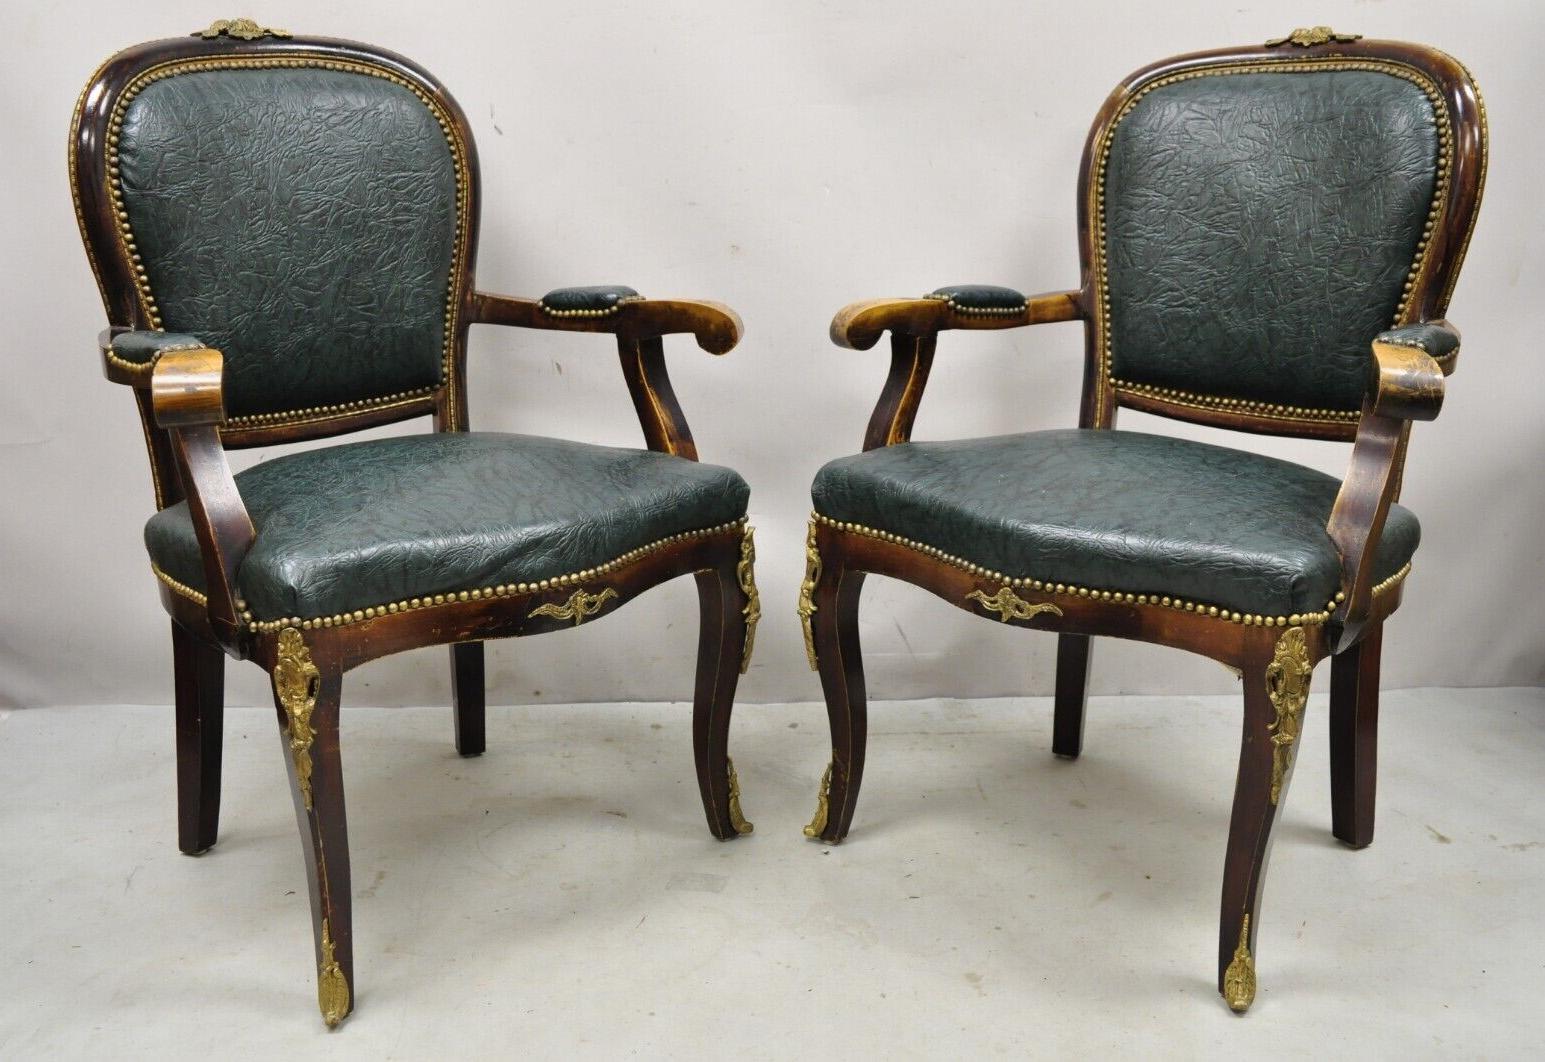 Vintage French Louis XV Style Solid Wood Bronze Ormolu Arm Chairs - a Pair. Item features  green vinyl/Naugahyde upholstery, brass ormolu, solid wood frames, distressed finish, cabriole legs, very nice vintage pair, great style and form. Circa Mid